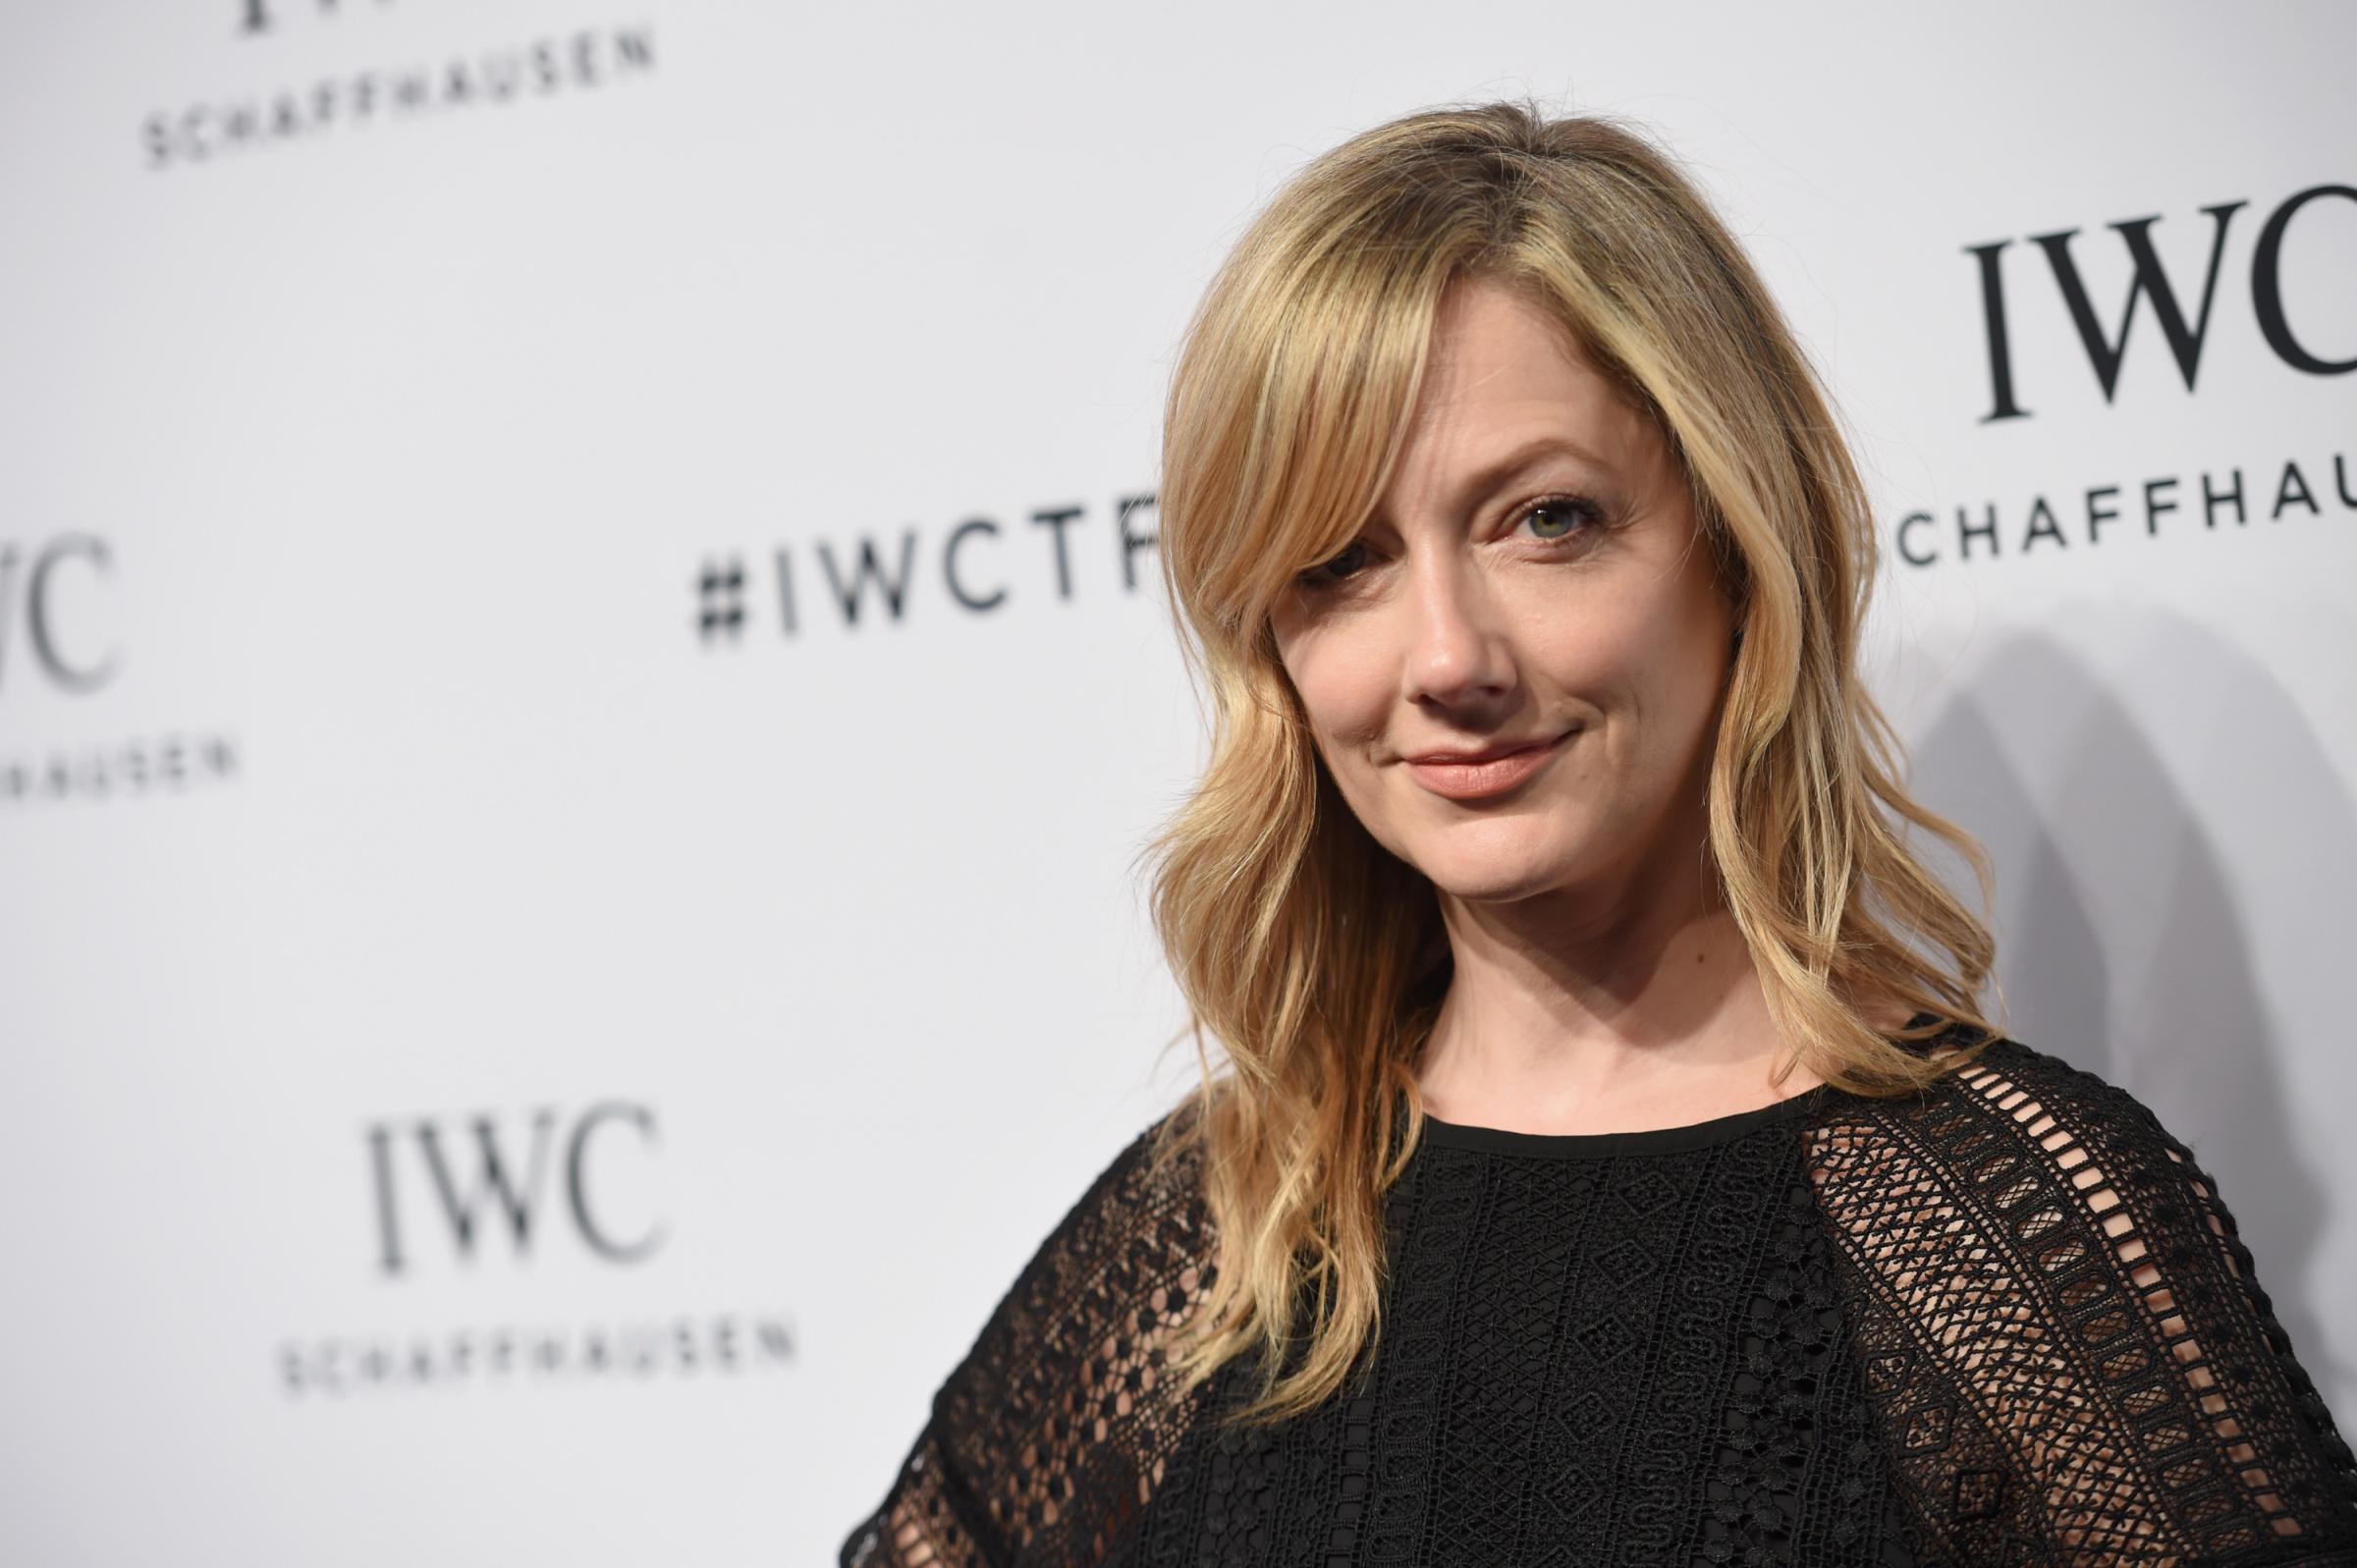 Actress Judy Greer attends the exclusive gala event For the Love of Cinema during the Tribeca Film Festival hosted by luxury watch manufacturer IWC Schaffhausen on April 14, 2016 in New York City.